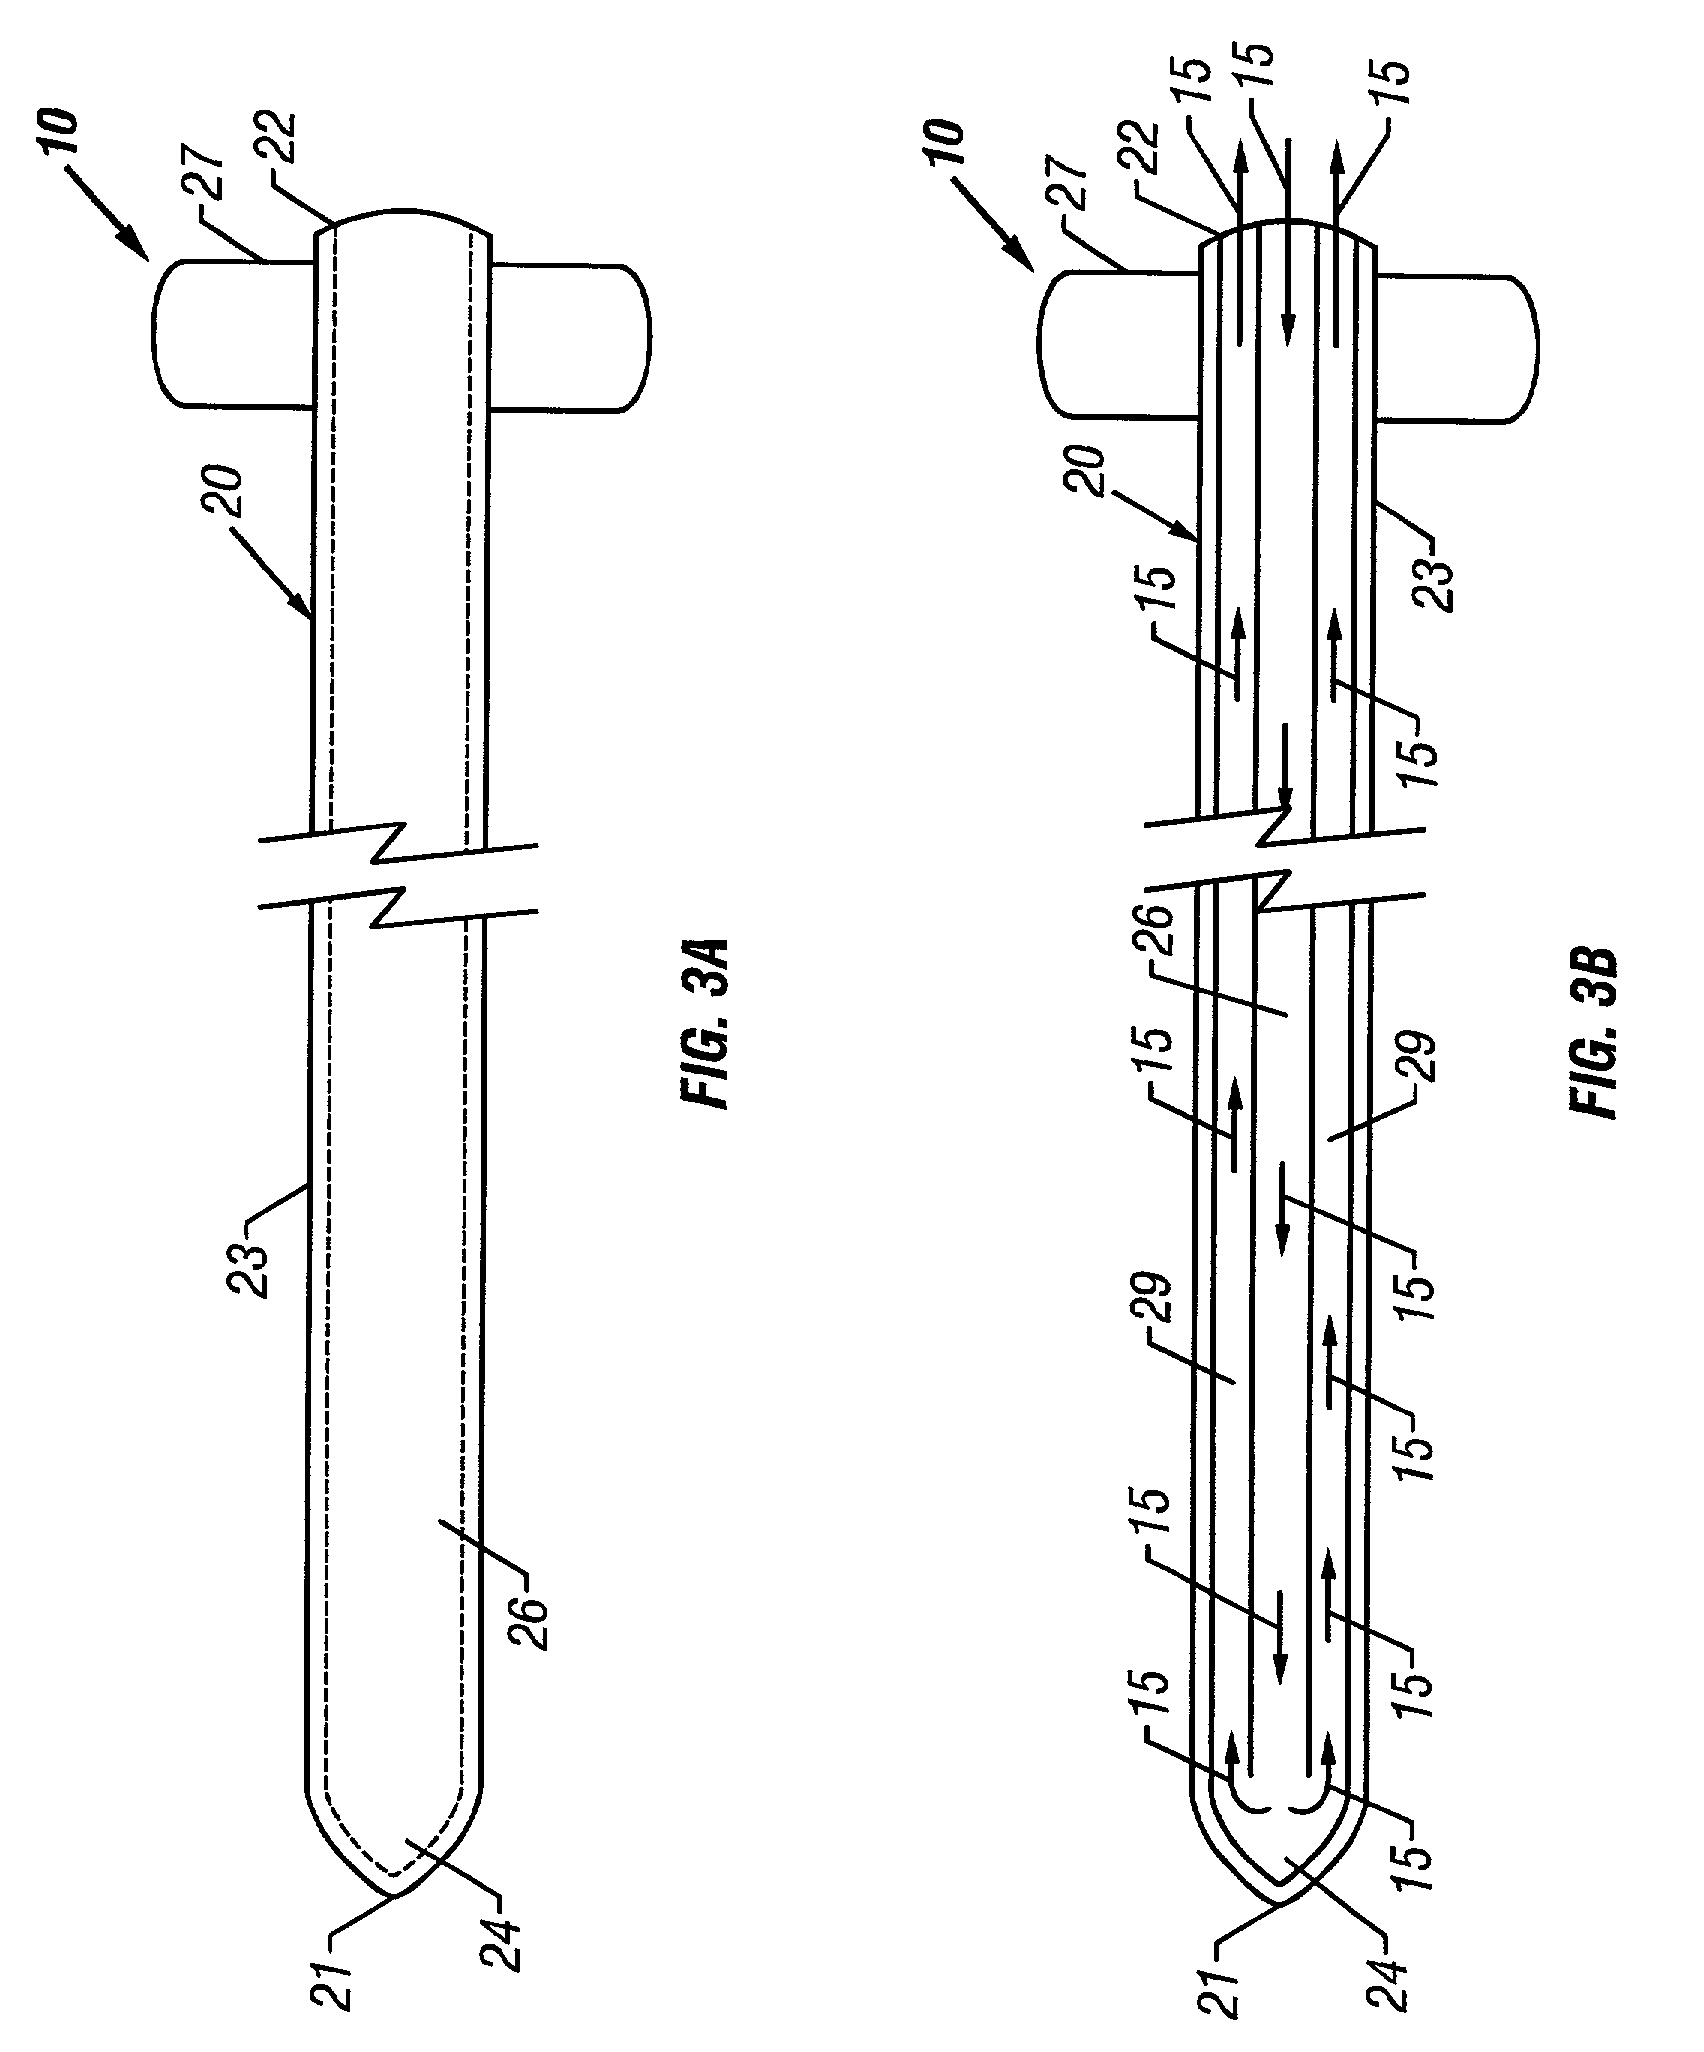 Methods and devices for intraosseous nerve ablation